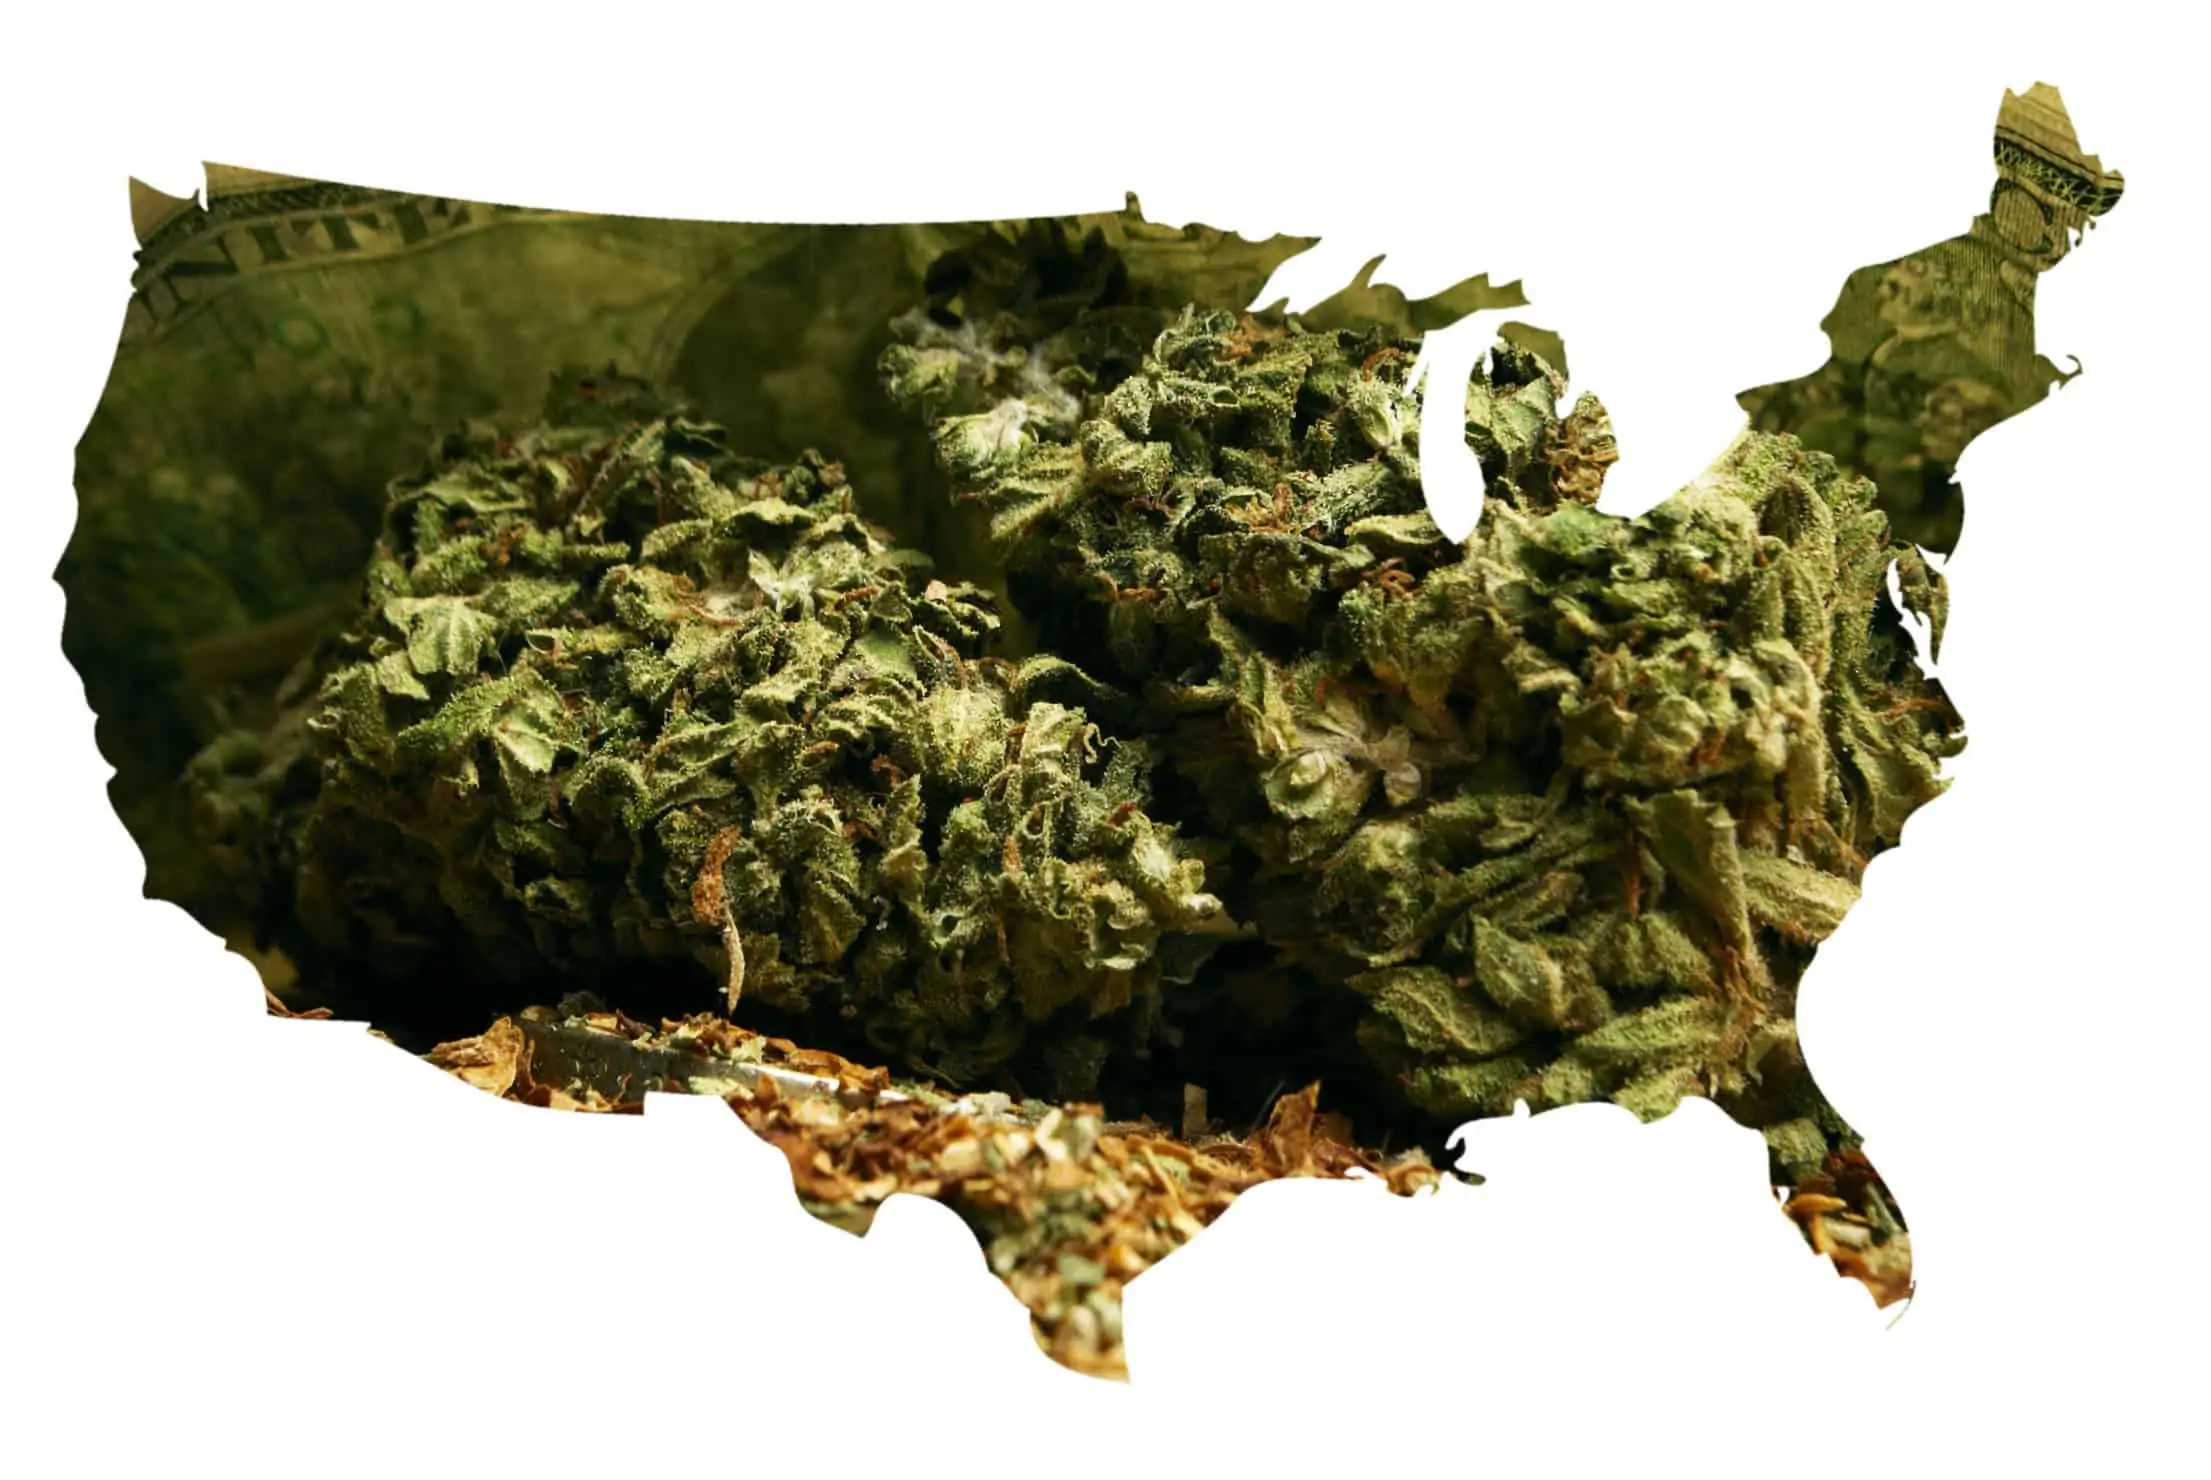 New Cannabis Laws in Utah, Missouri, and Michigan: What To Know